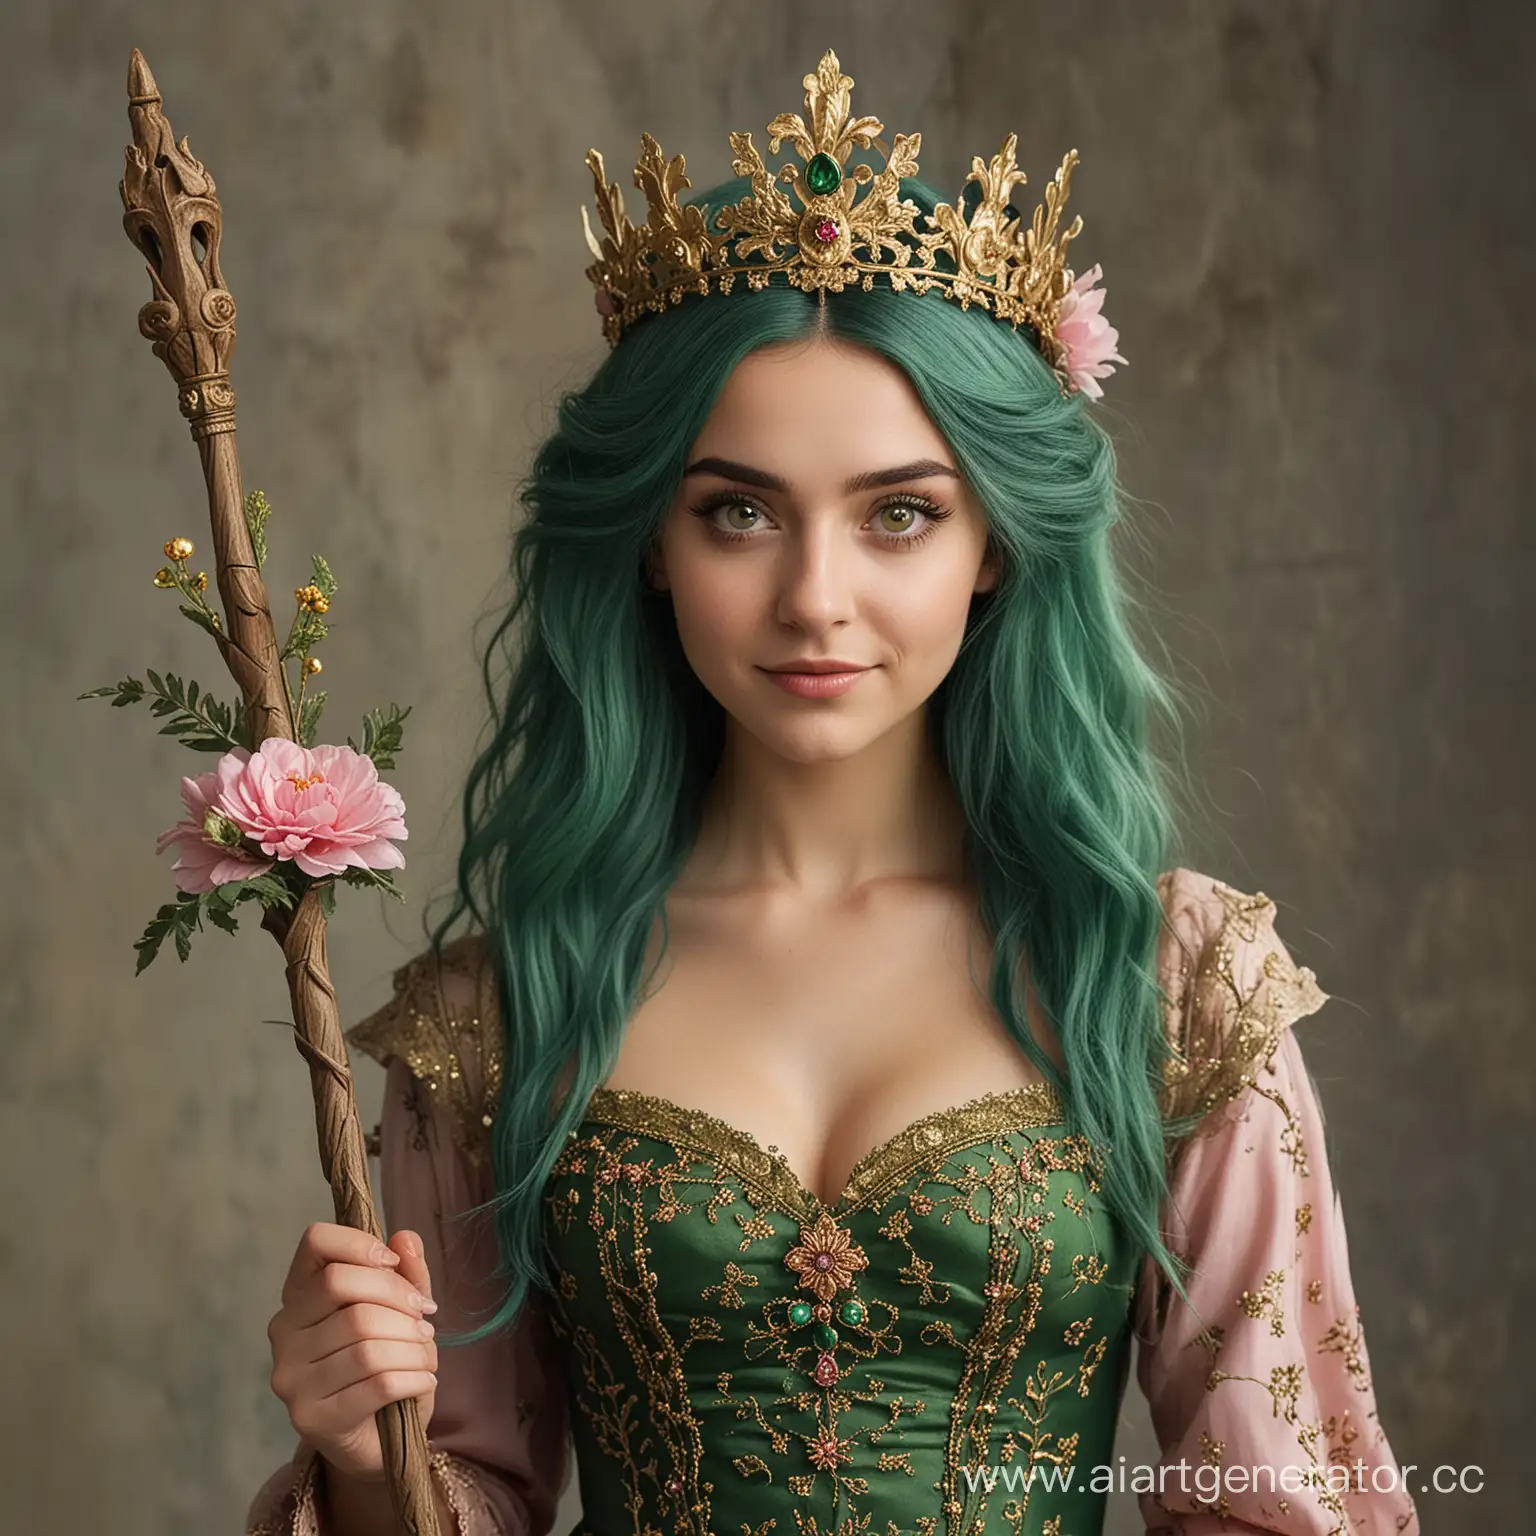 Enigmatic-GreenHaired-Sorceress-with-Oak-Staff-and-Golden-Crown